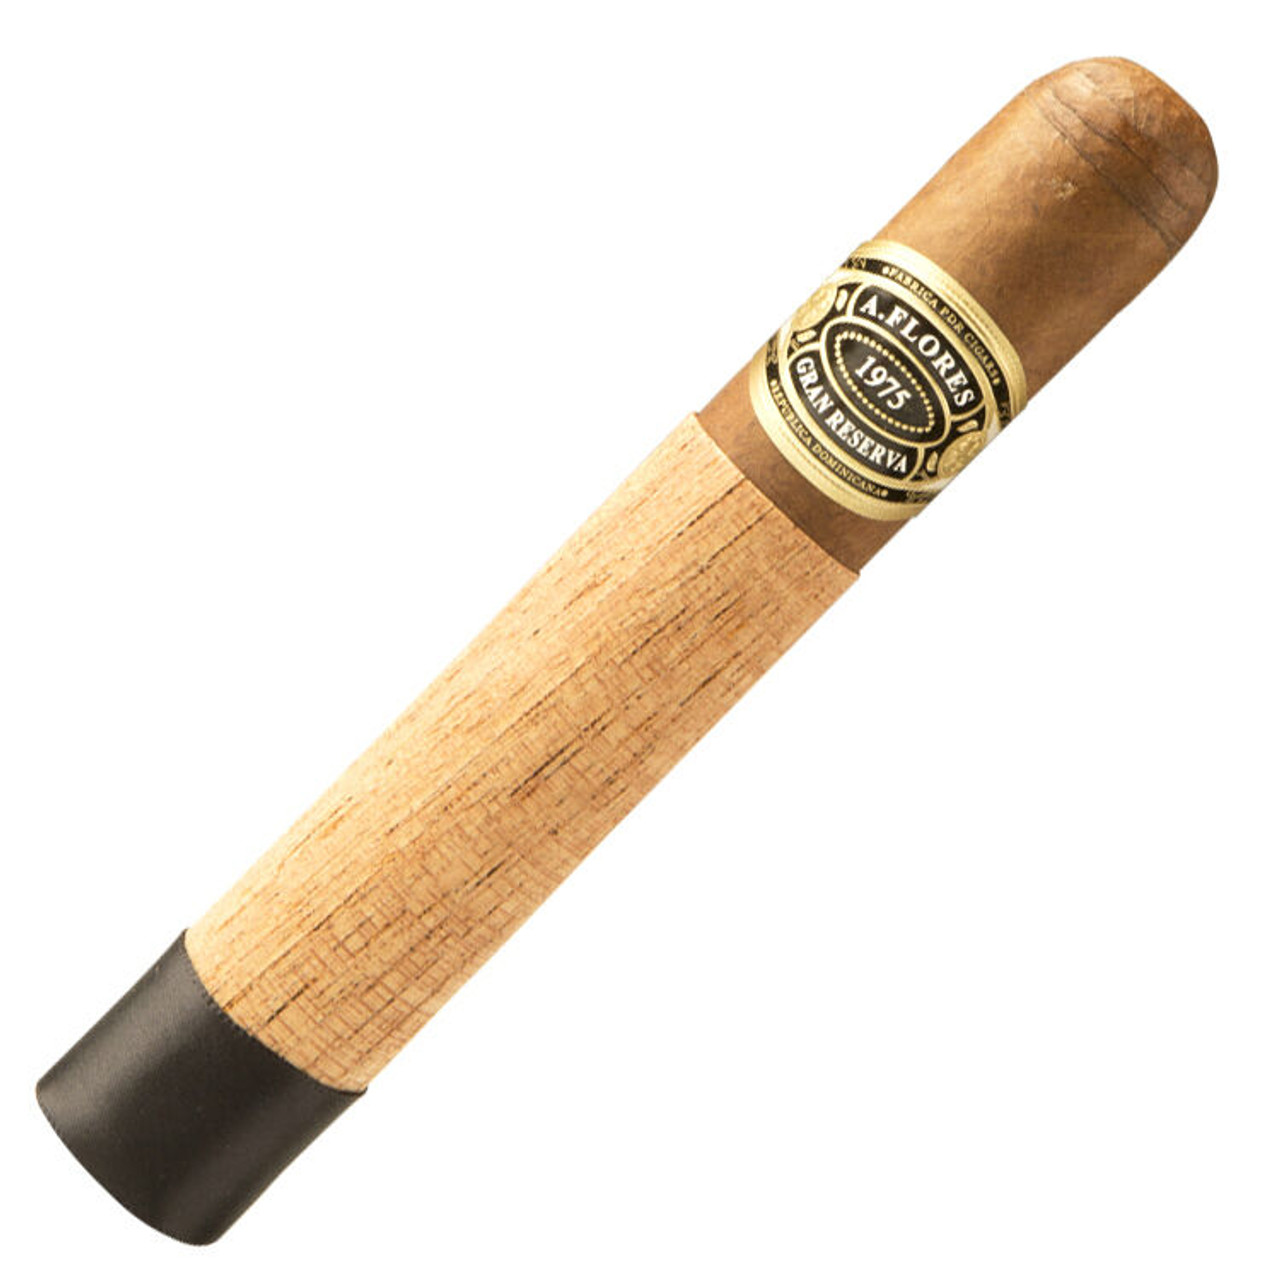 PDR A. Flores Gran Reserva Corojo 2006 Double Magnum Cigars - 6 x 60 (Box of 24)